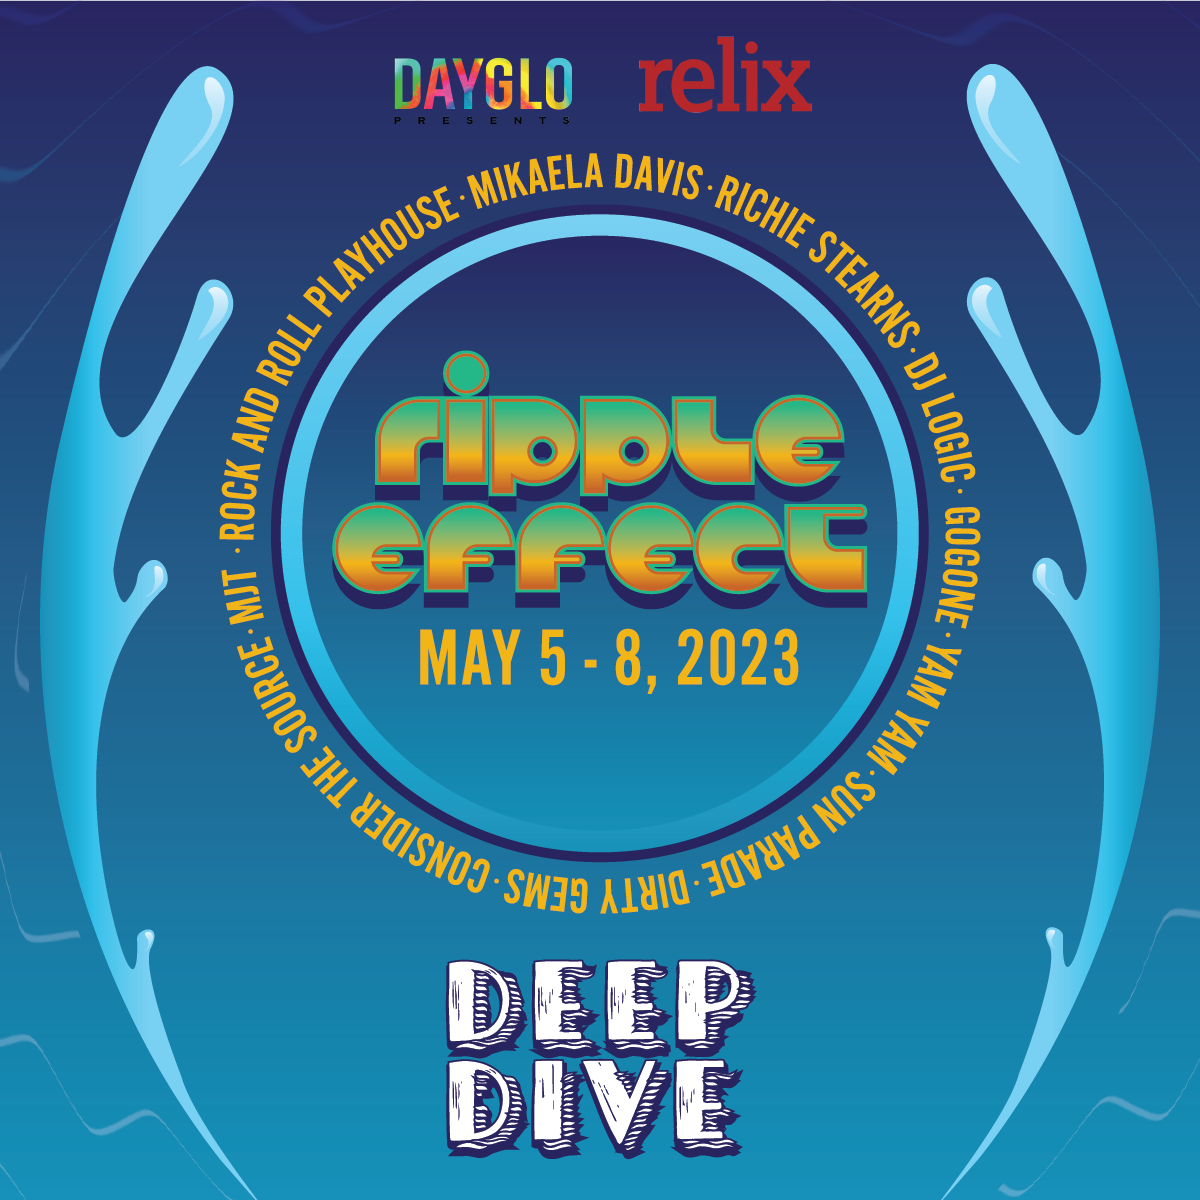 Dayglo, Relix and Deep Dive Present Ripple Effect: Four Days of Music in Ithaca Featuring DJ Logic, Mikaela Davis and More